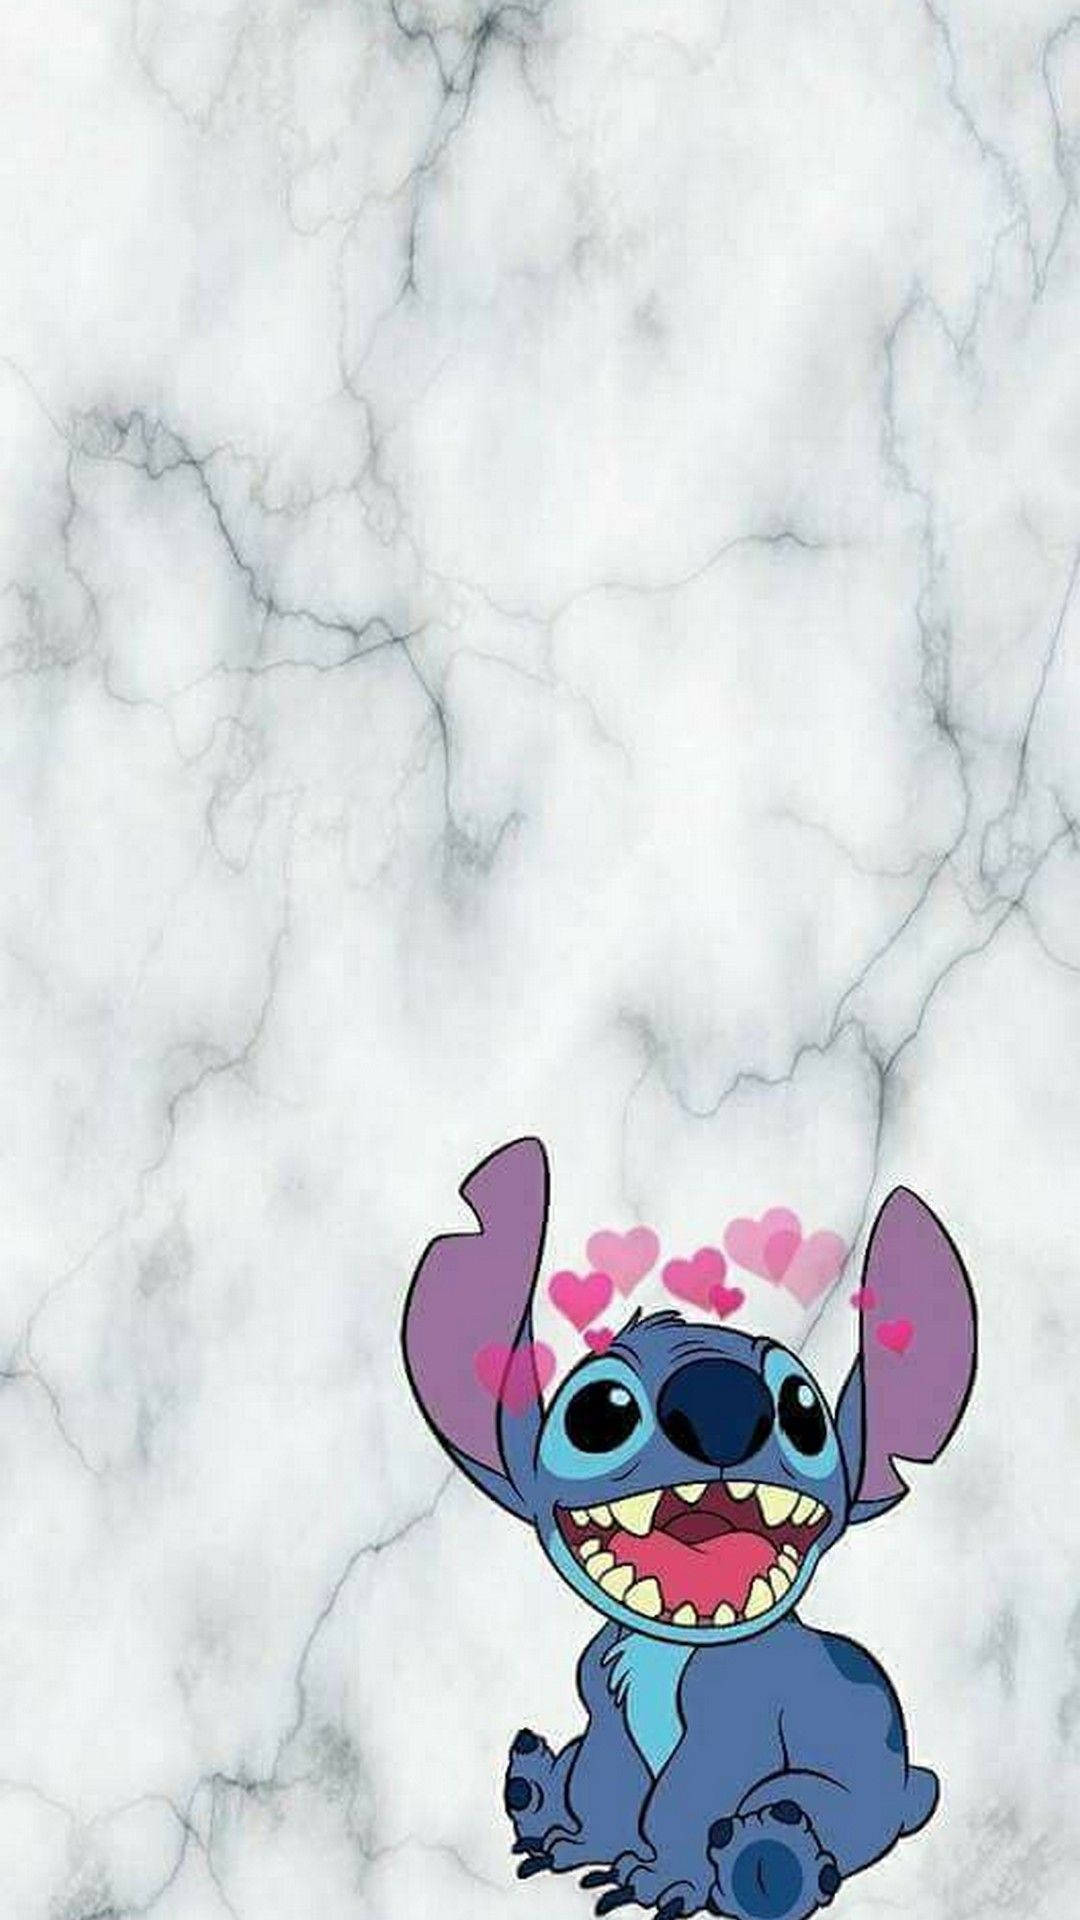 Cute Aesthetic Stitch With Heart Emojis Wallpaper